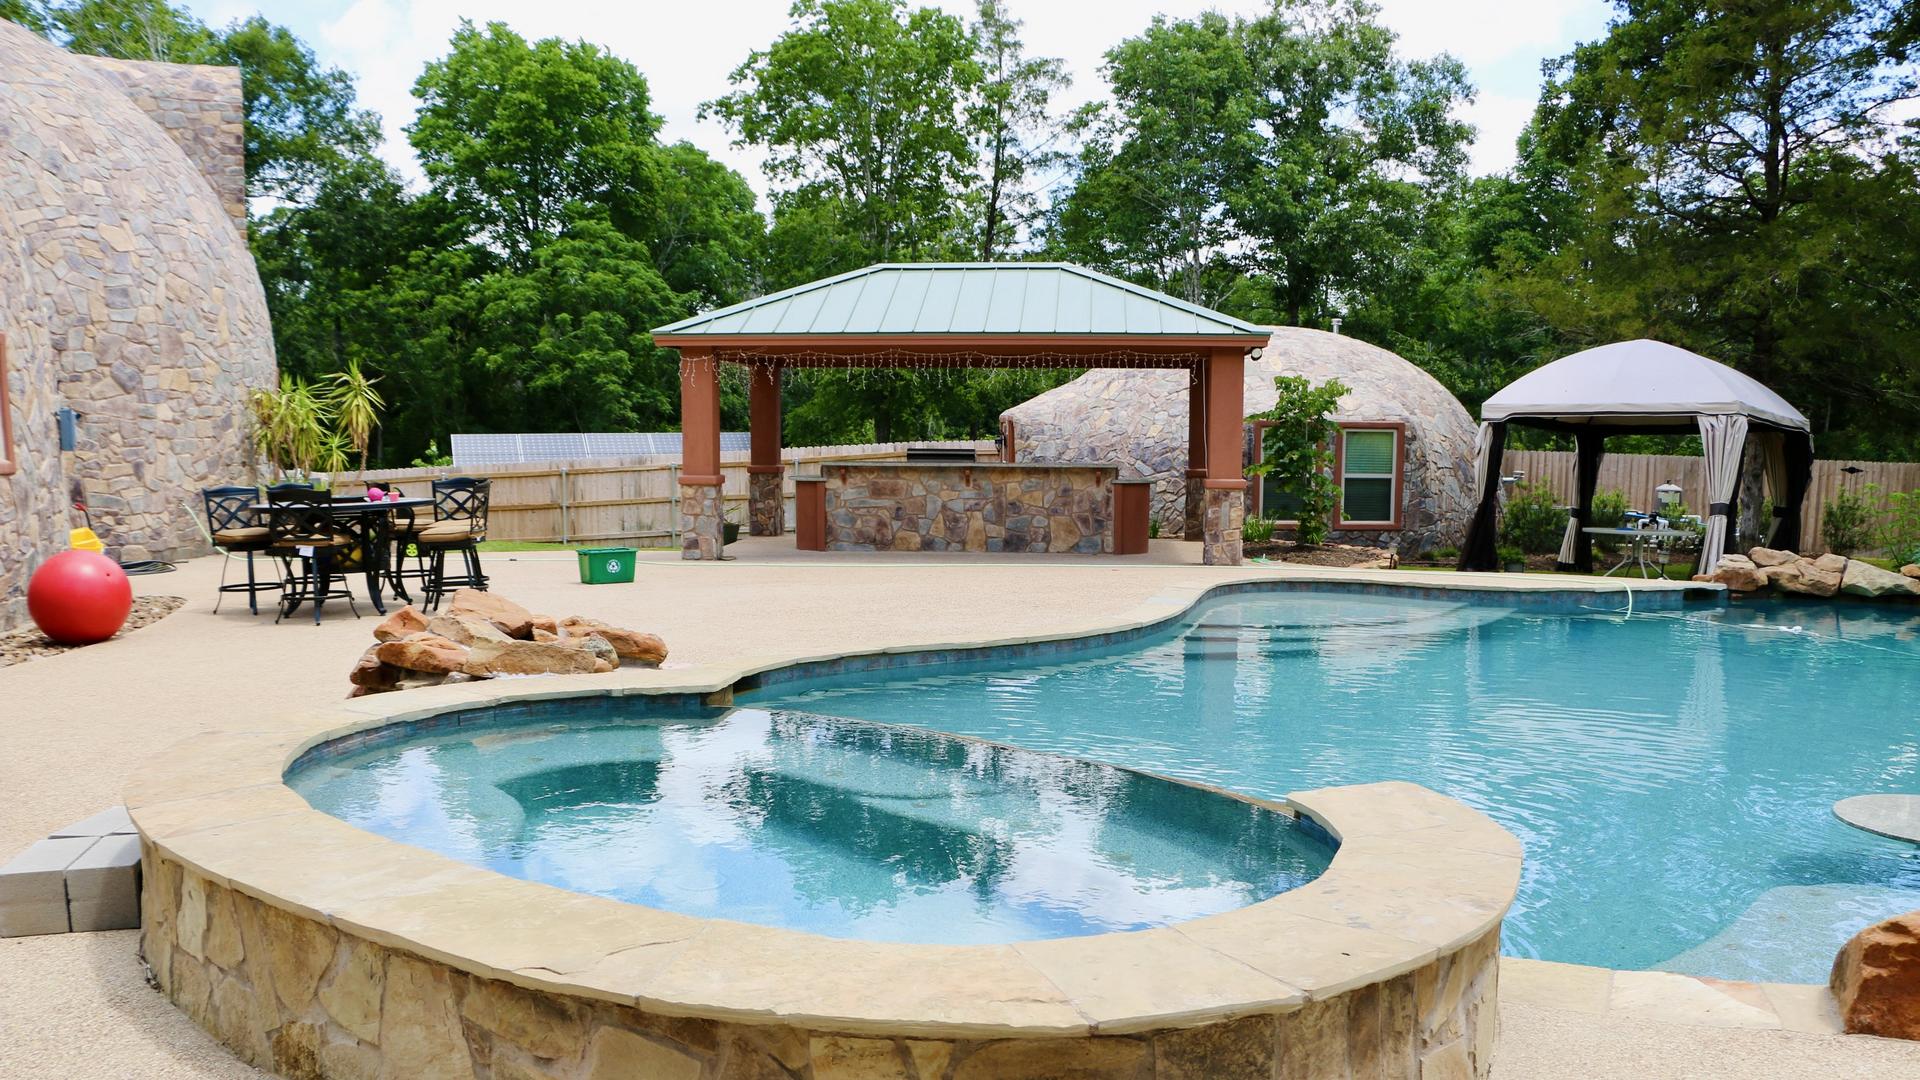 S-shaped swimming pool and dome guest house.